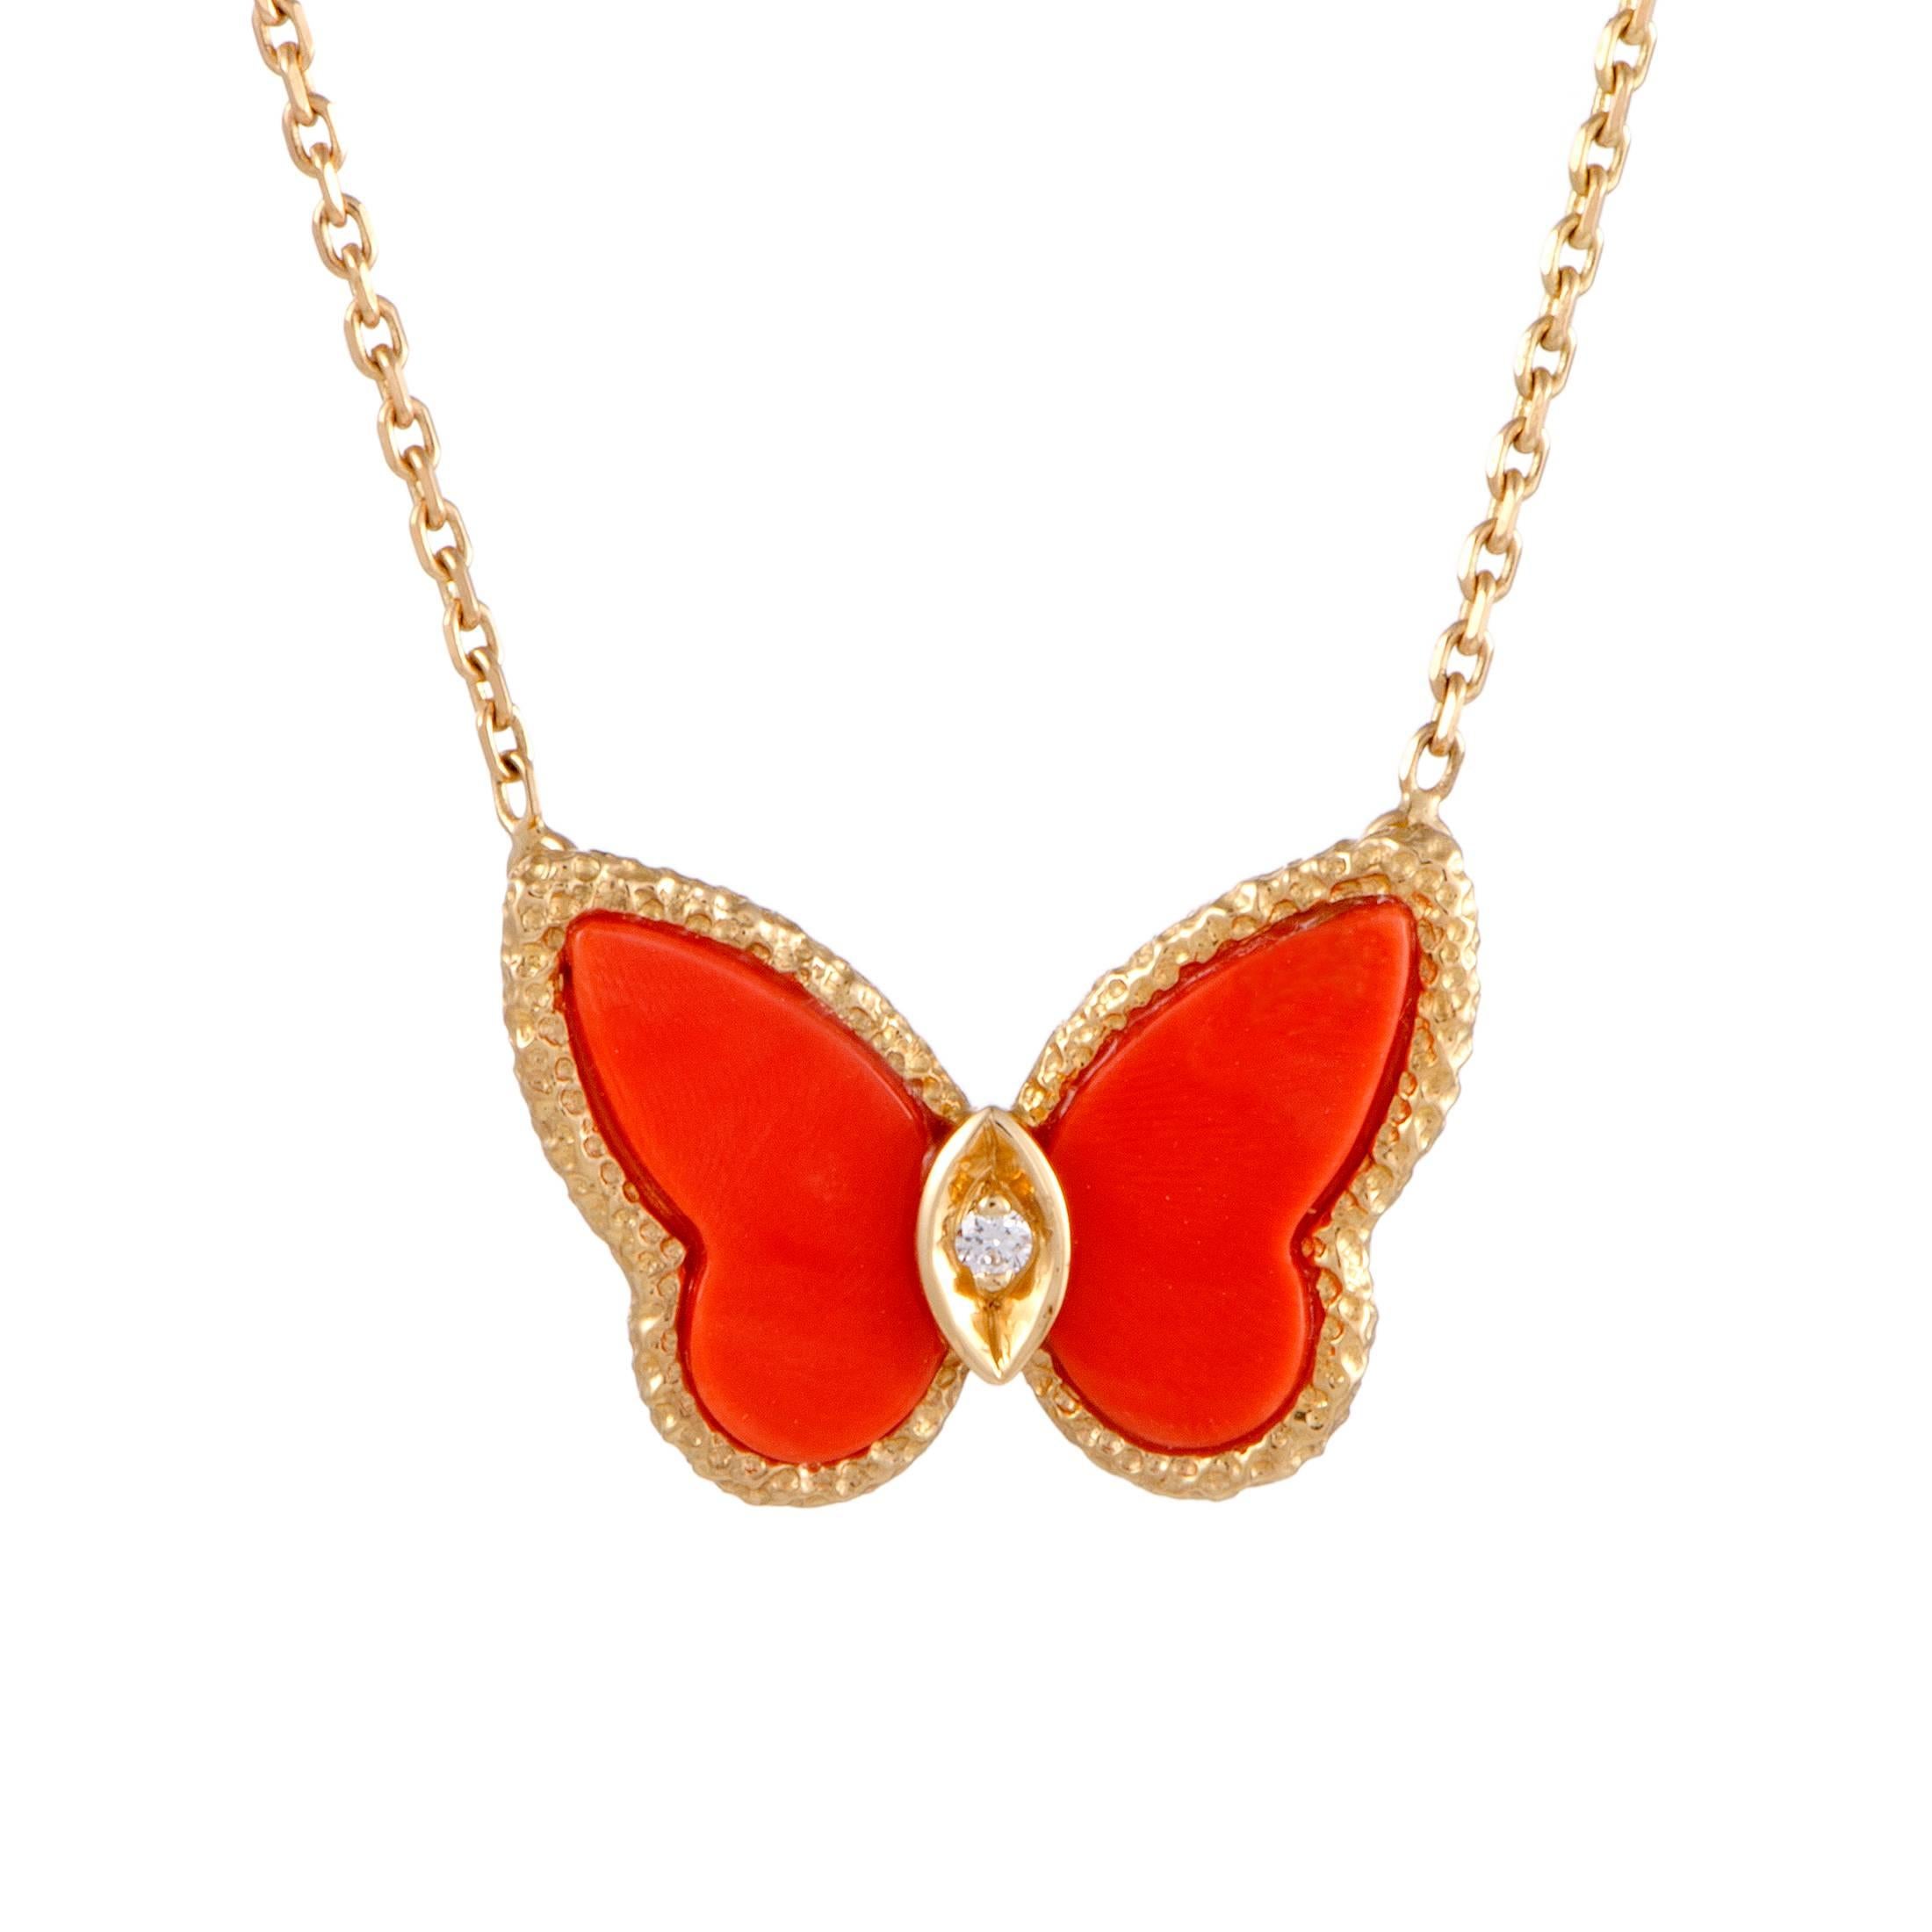 Van Cleef & Arpels Diamond and Coral Yellow Gold Butterfly Pendant Necklace